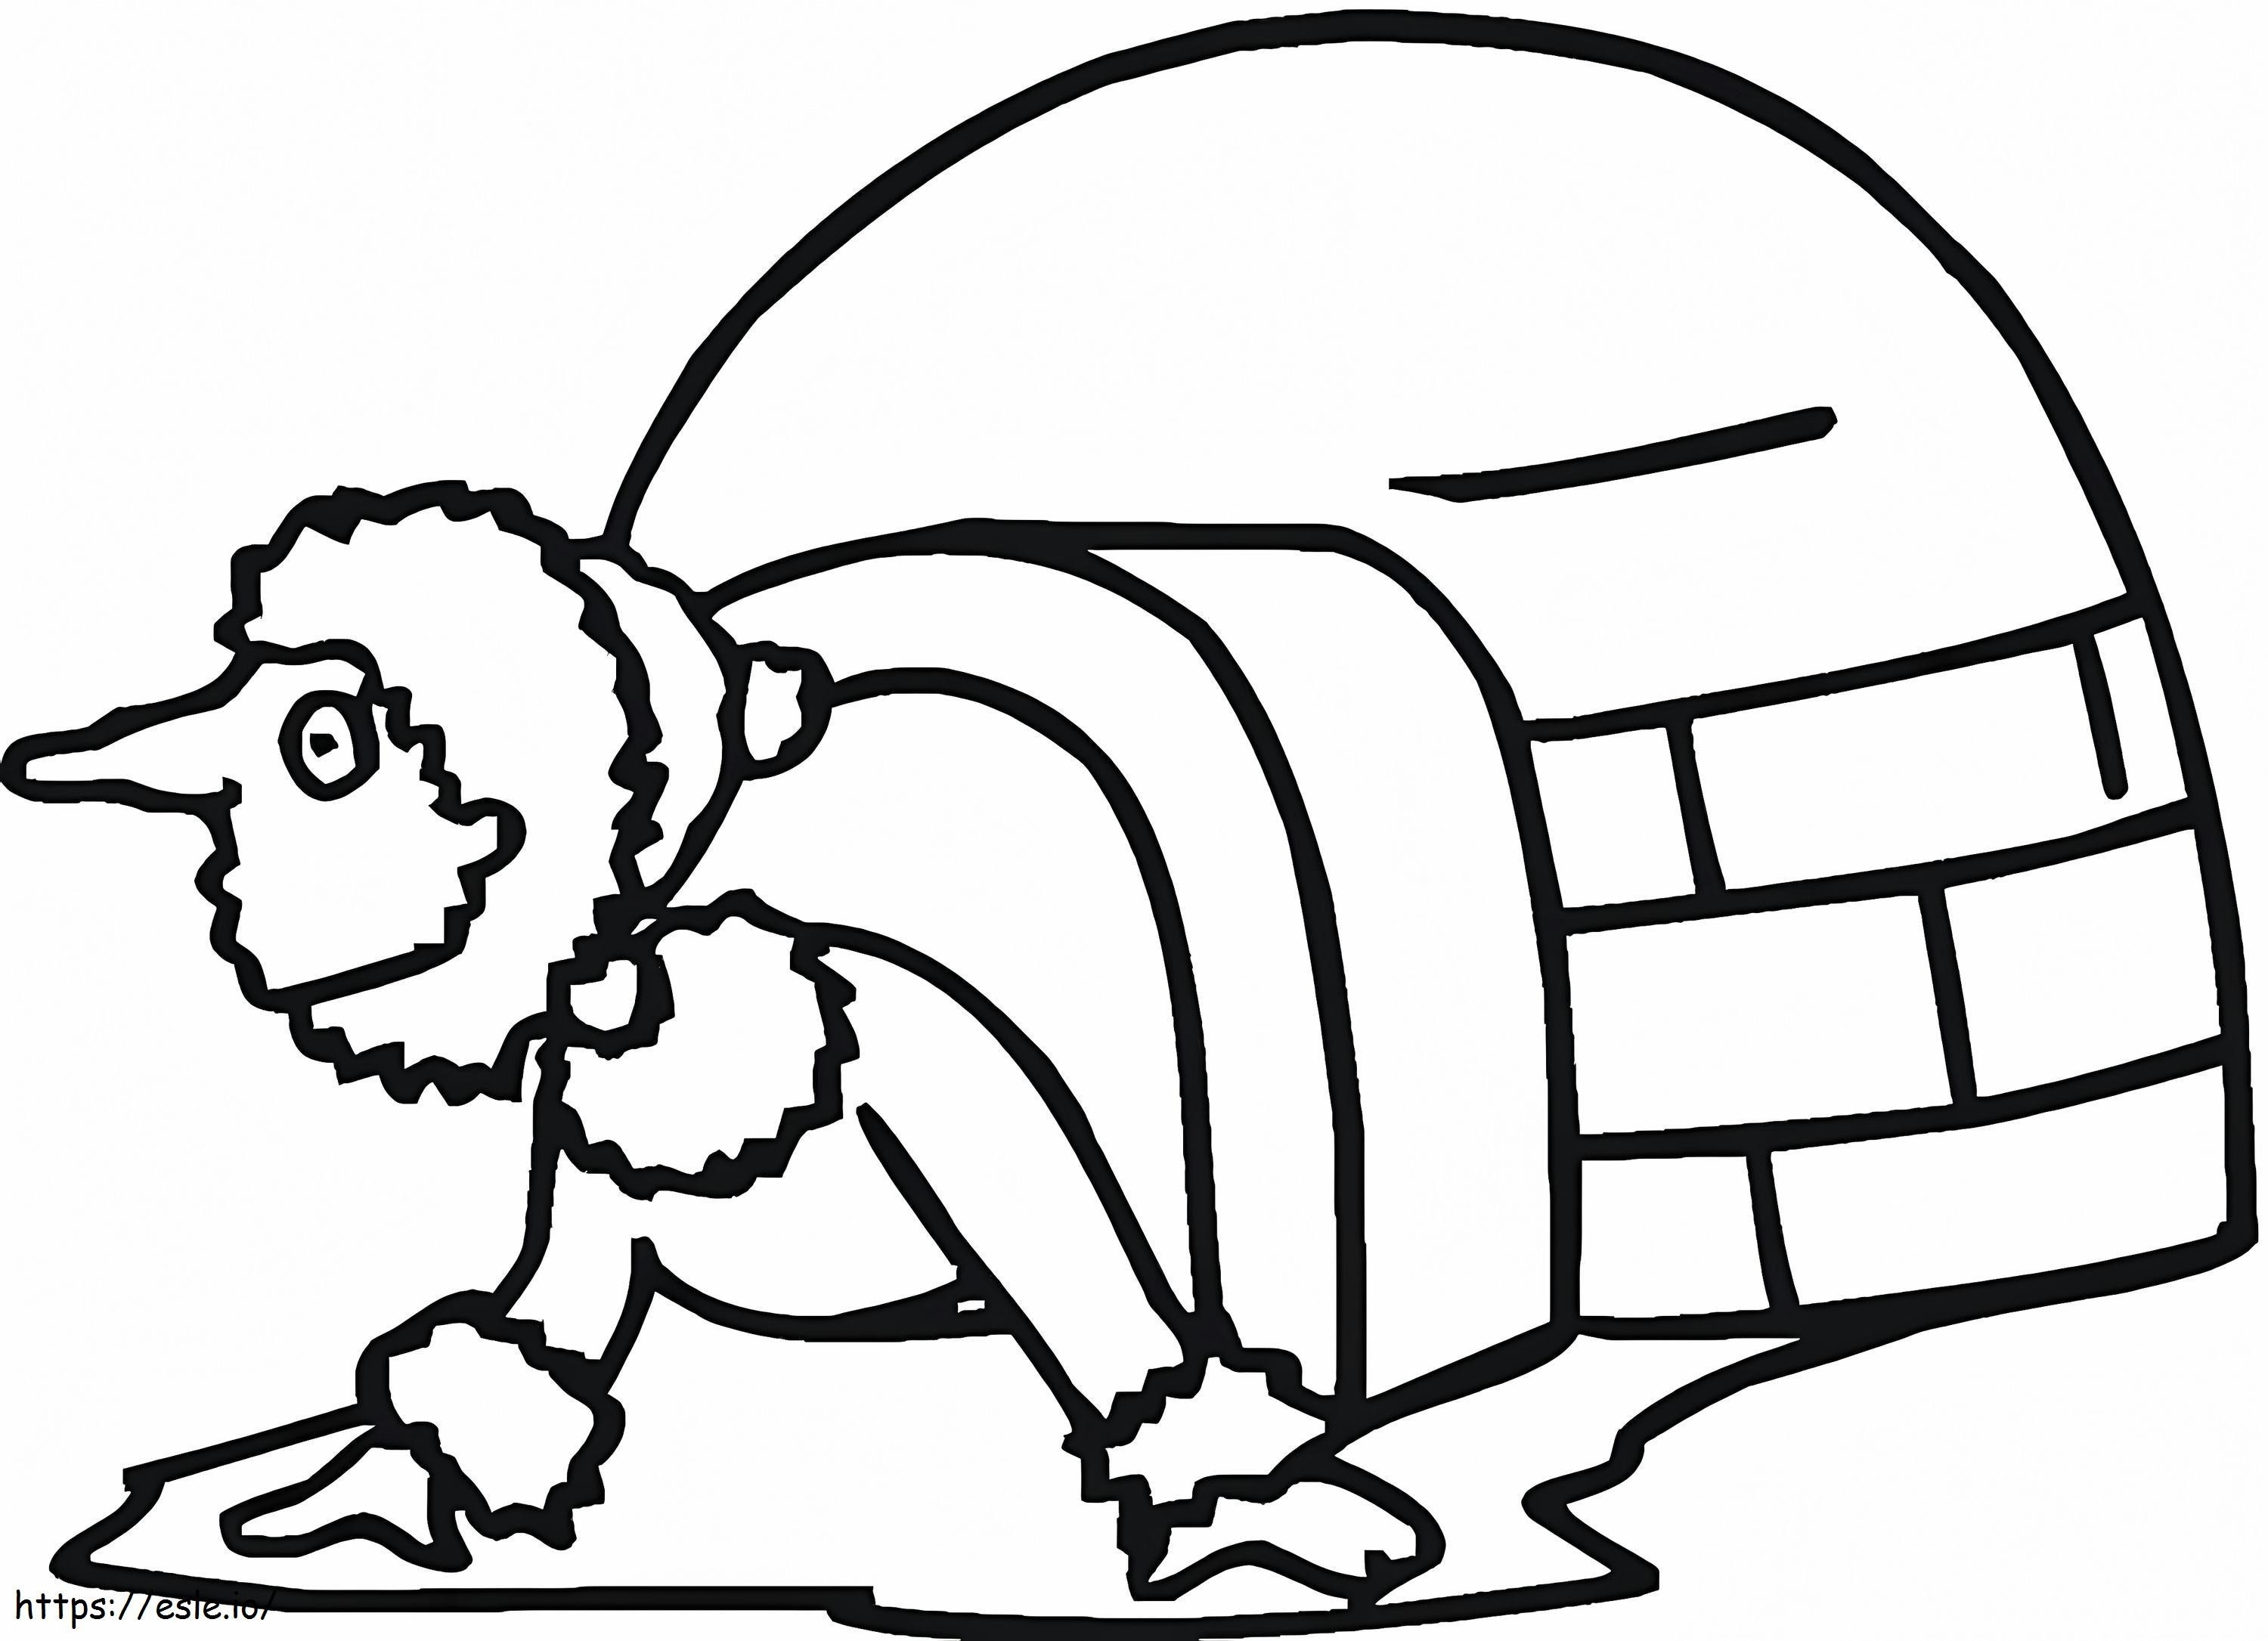 Igloo 5 coloring page